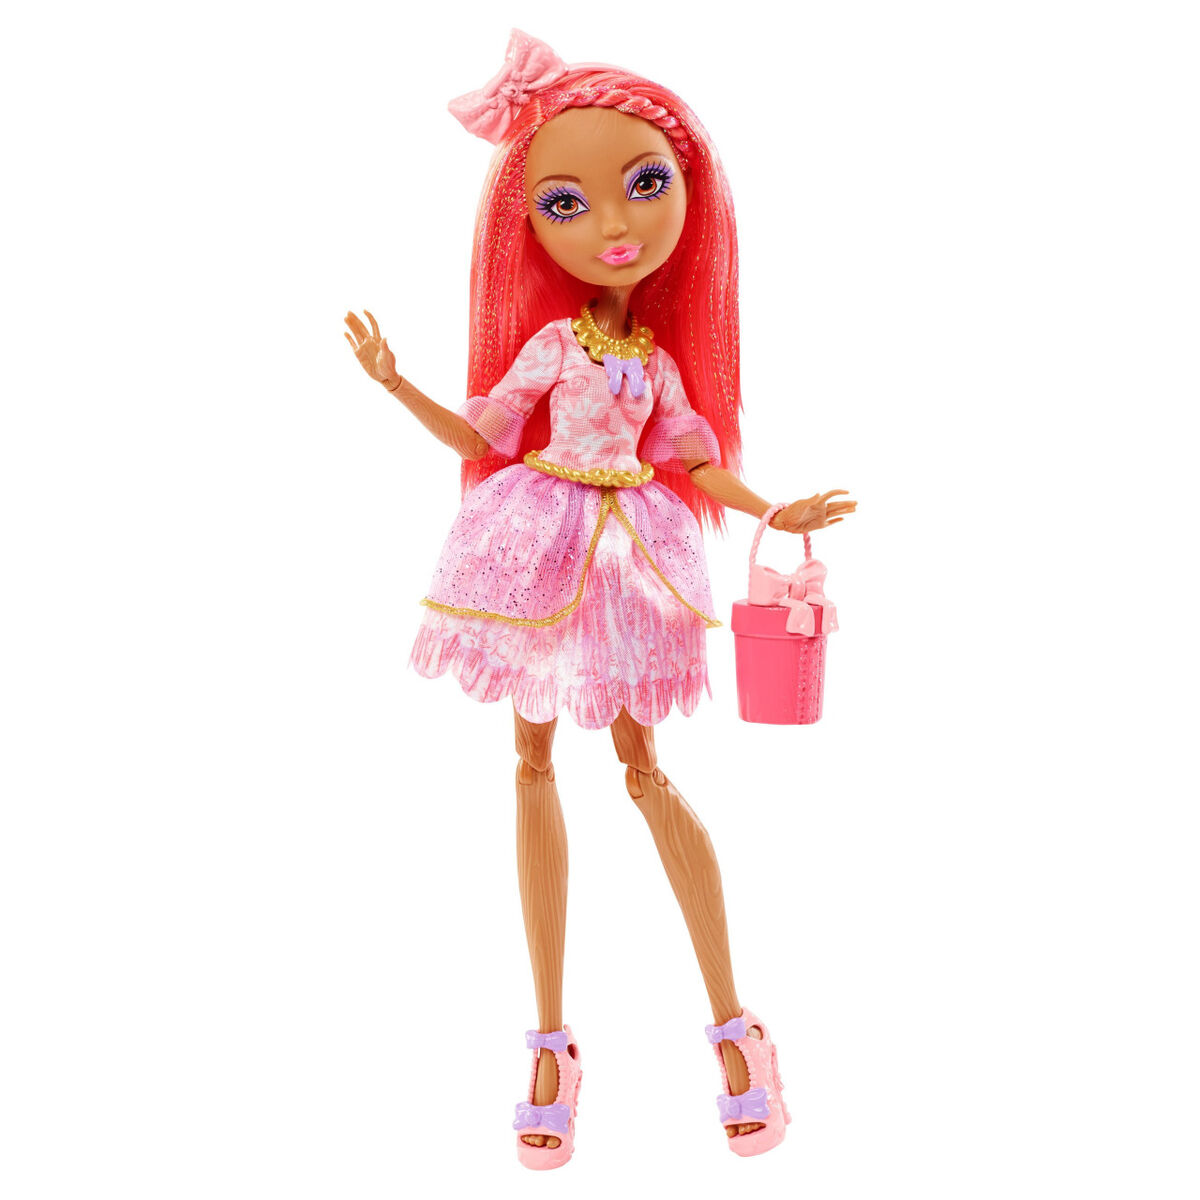 Tiny Frock Shop Ever After High Rosabella Beauty First Chapter Doll